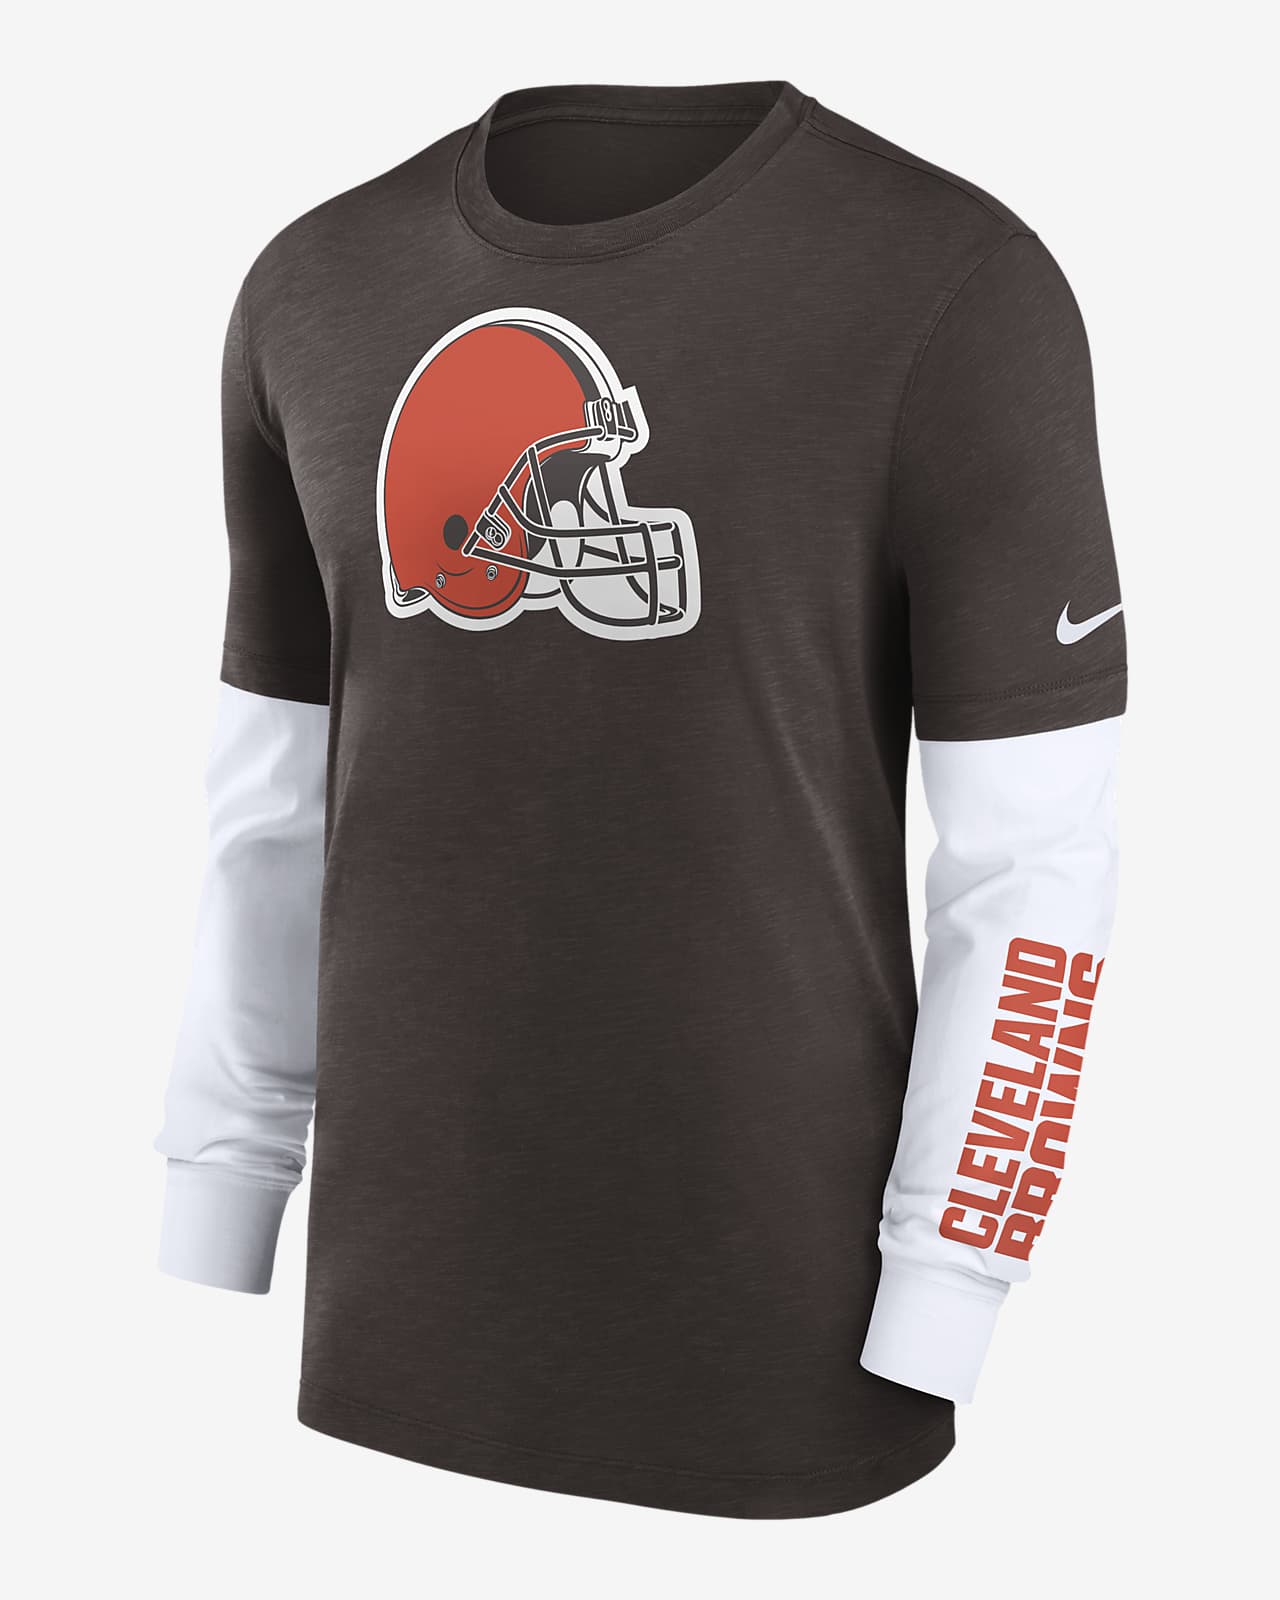 Cleveland Browns Nike Men's NFL Long-Sleeve Top in Brown, Size: 3XL | 00BY01TT93-05G